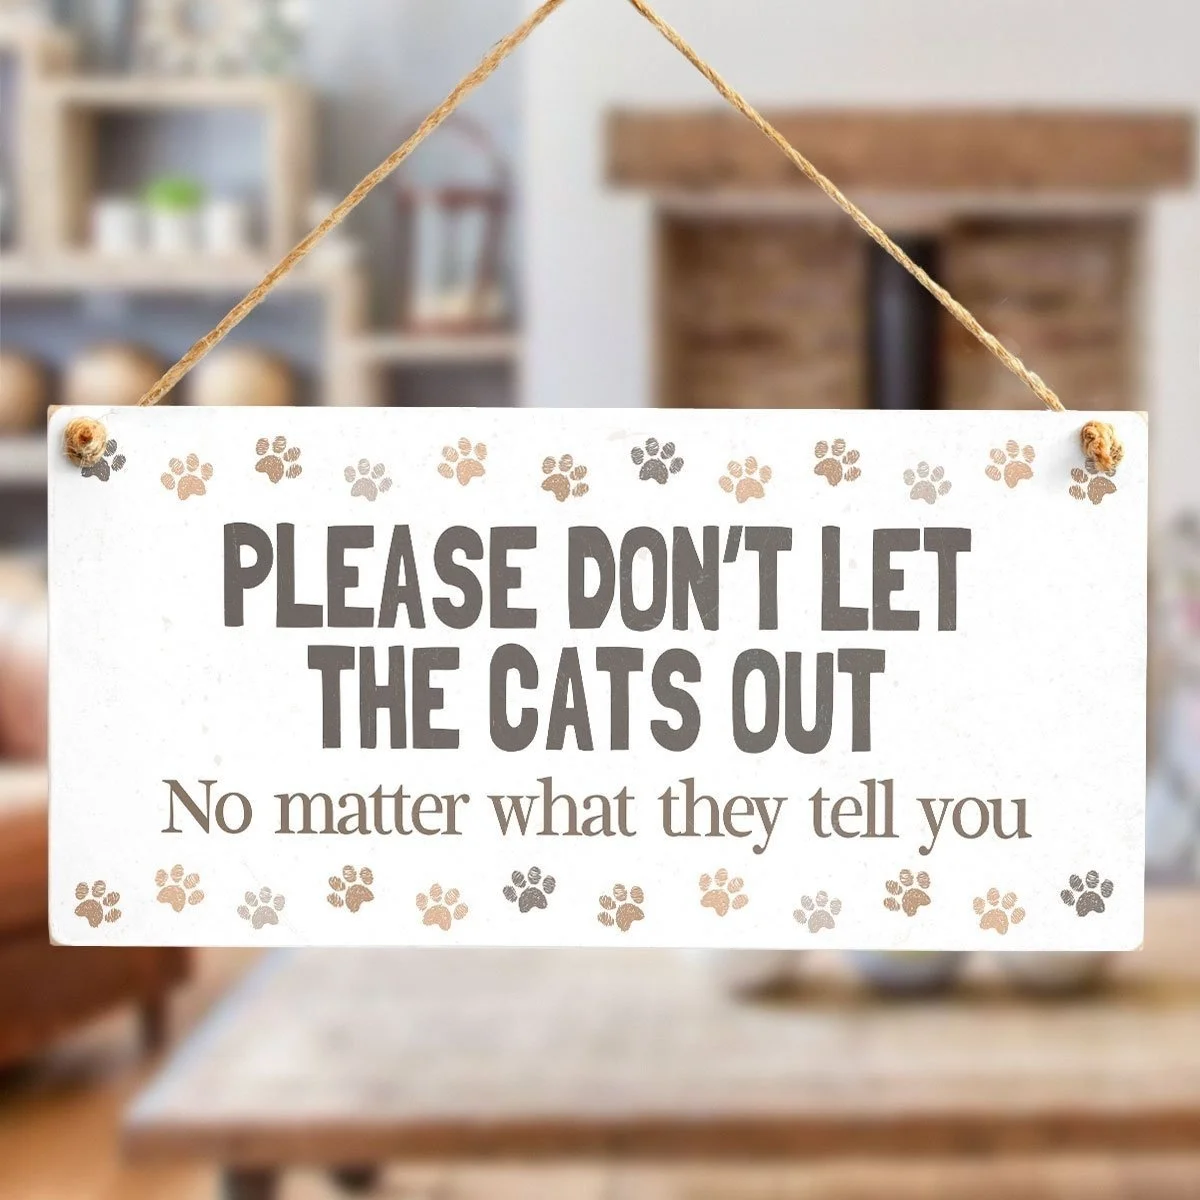 

PLEASE DON'T LET THE CATS OUT No Matter What They Tell You - Cute Indoor House Cat Home Accessory Gift Sign